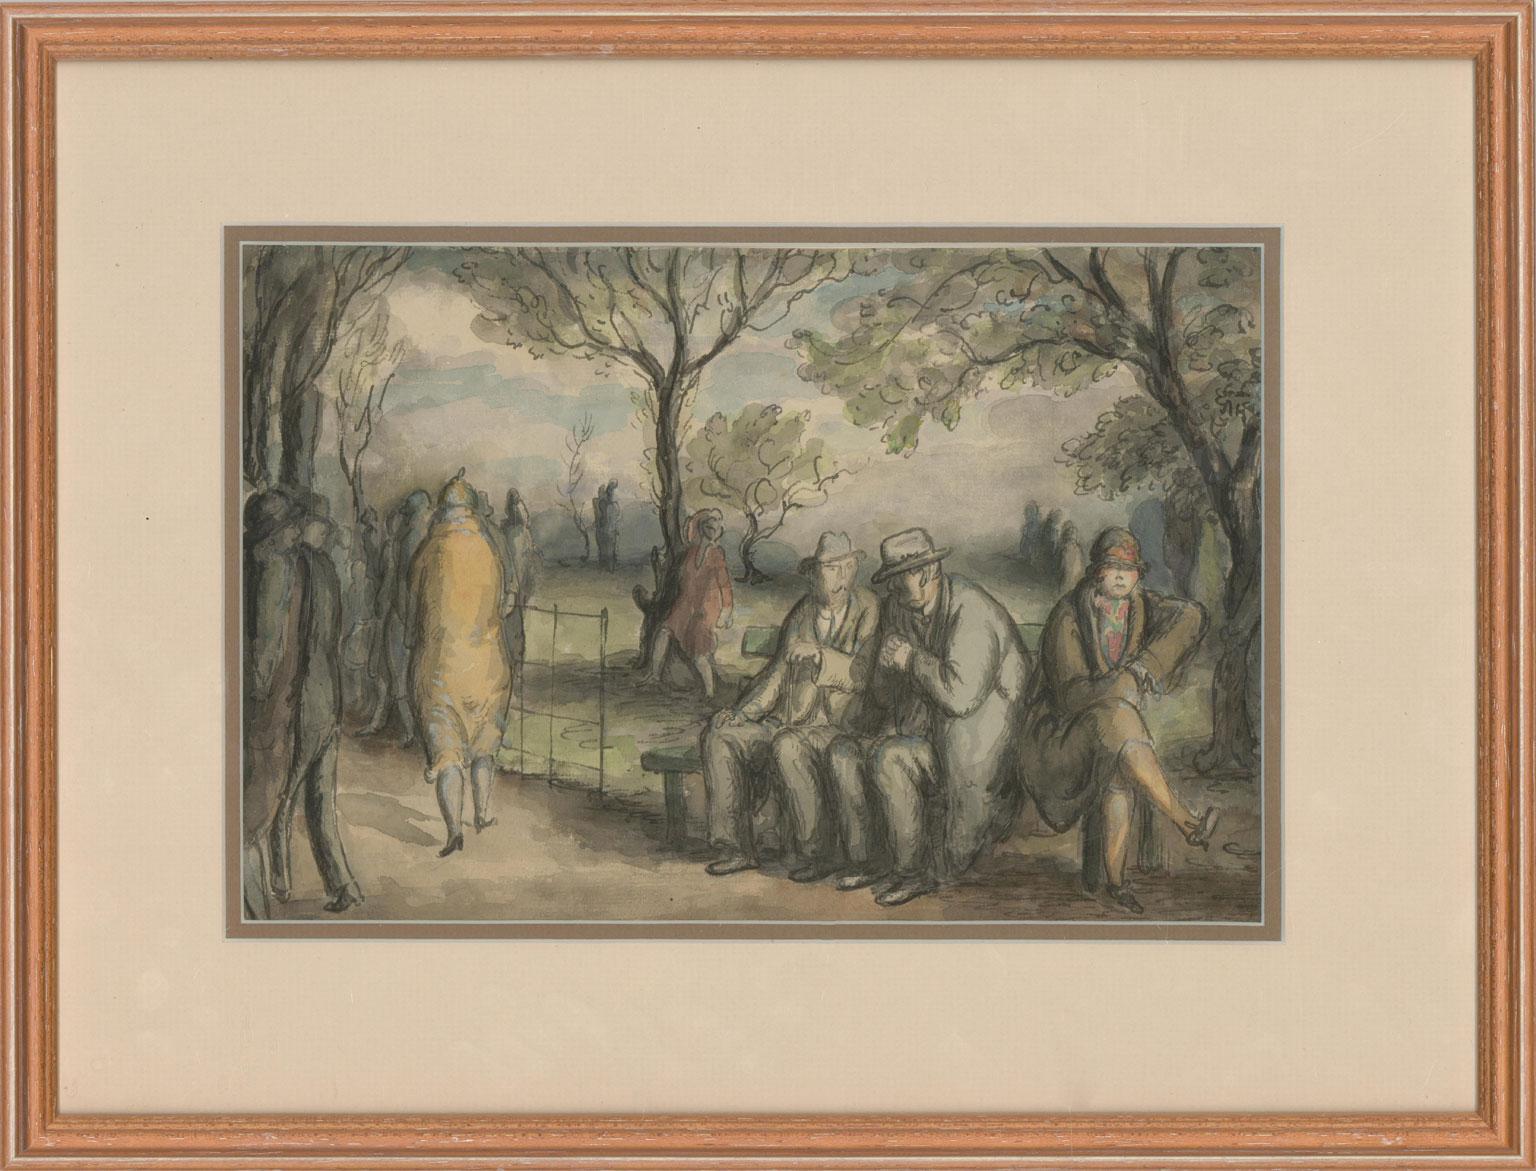 A characterful study of figures in an autumnal park, well presented in a card double mount and modern pale wood frame. Unsigned. On wove.